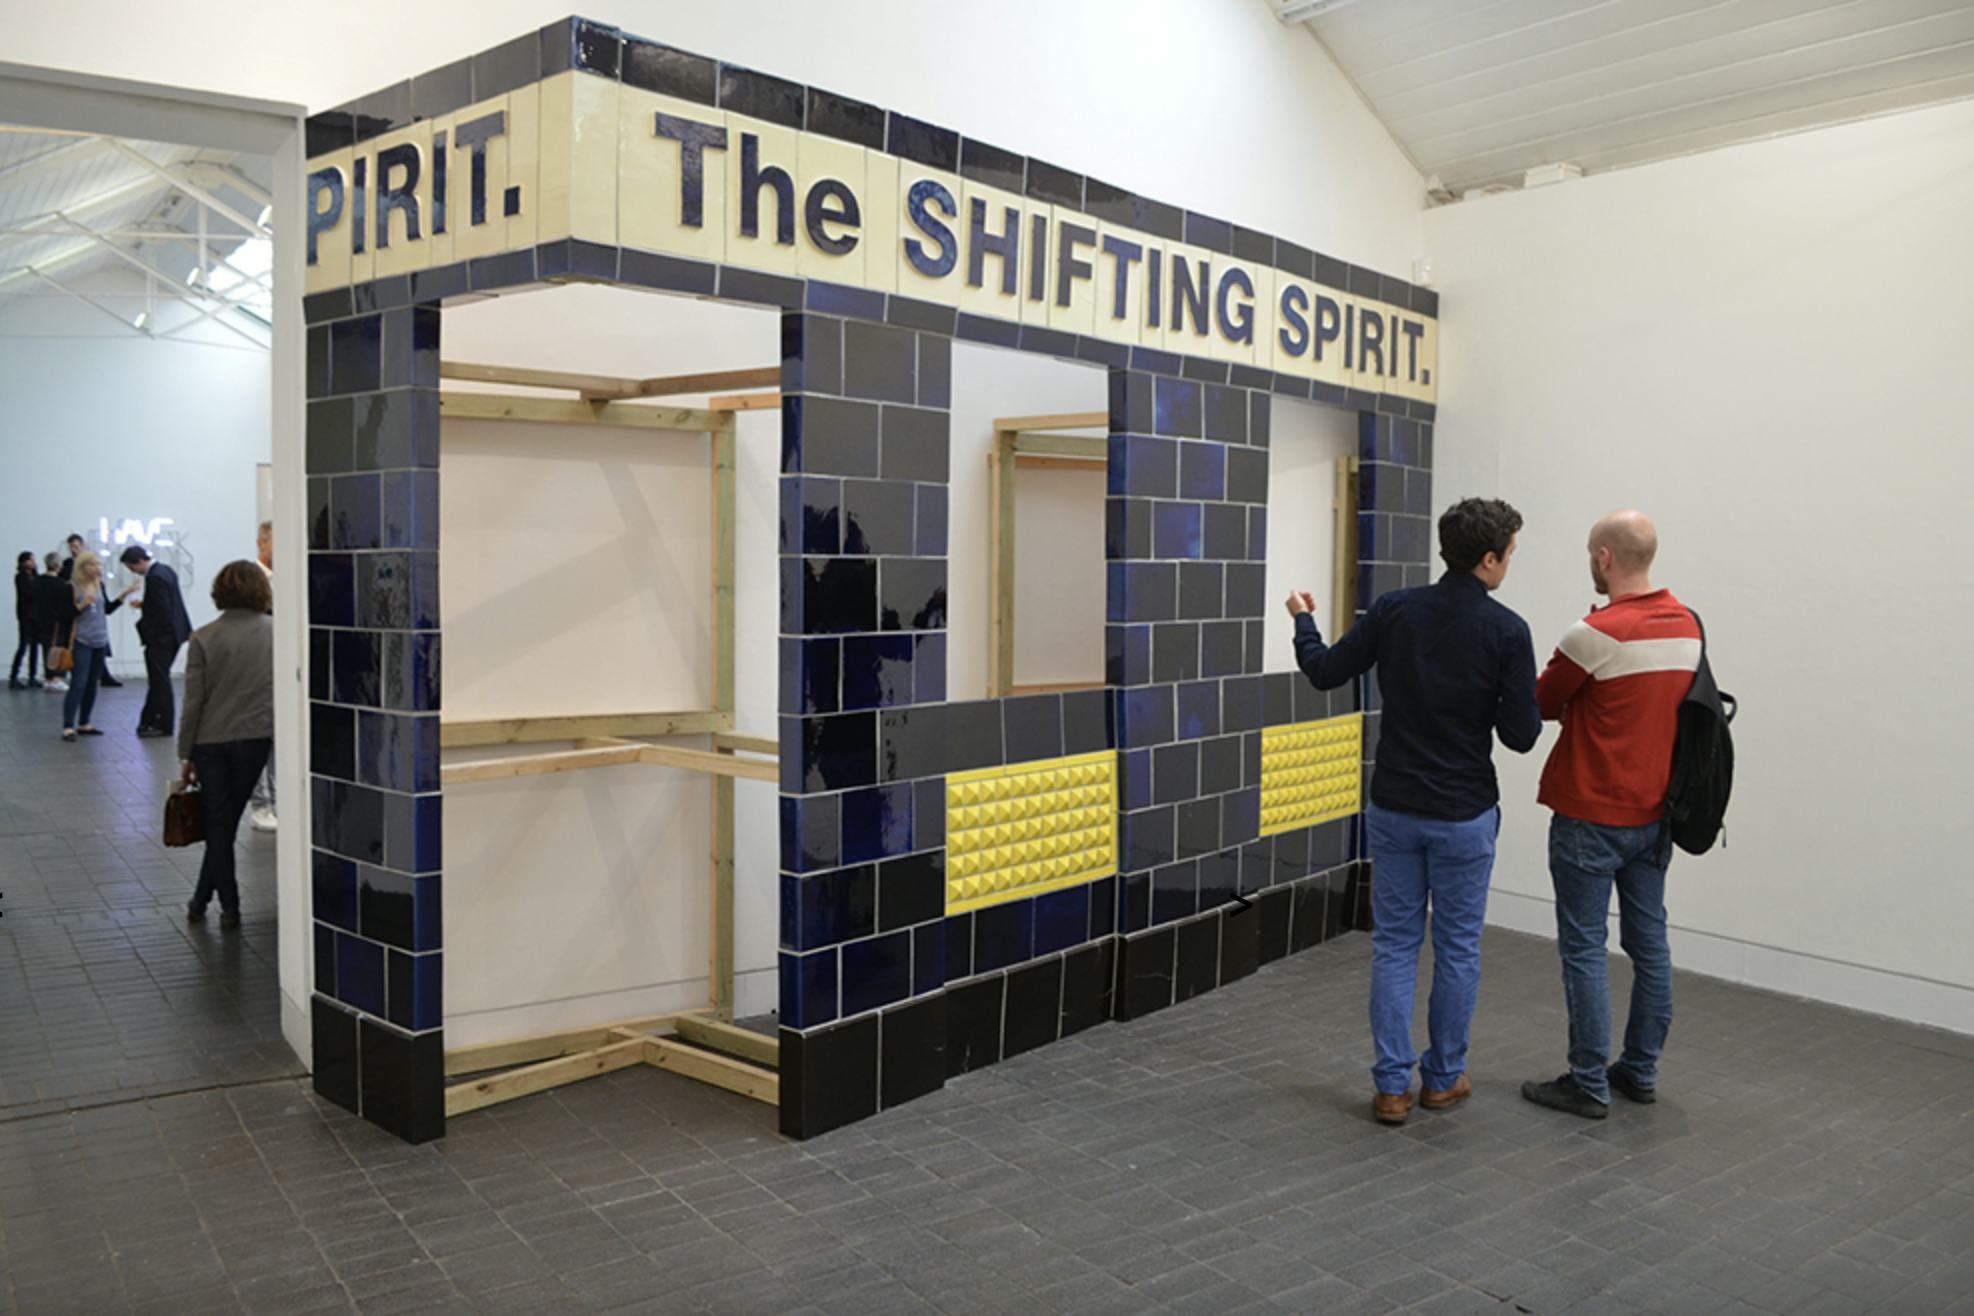 Two people stand in front of an artwork of a tiled facade of a pub. The text ‘The SHIFTING SPIRIT’ is visible on the artwork. More people are visible through a doorway into the next room of the art gallery